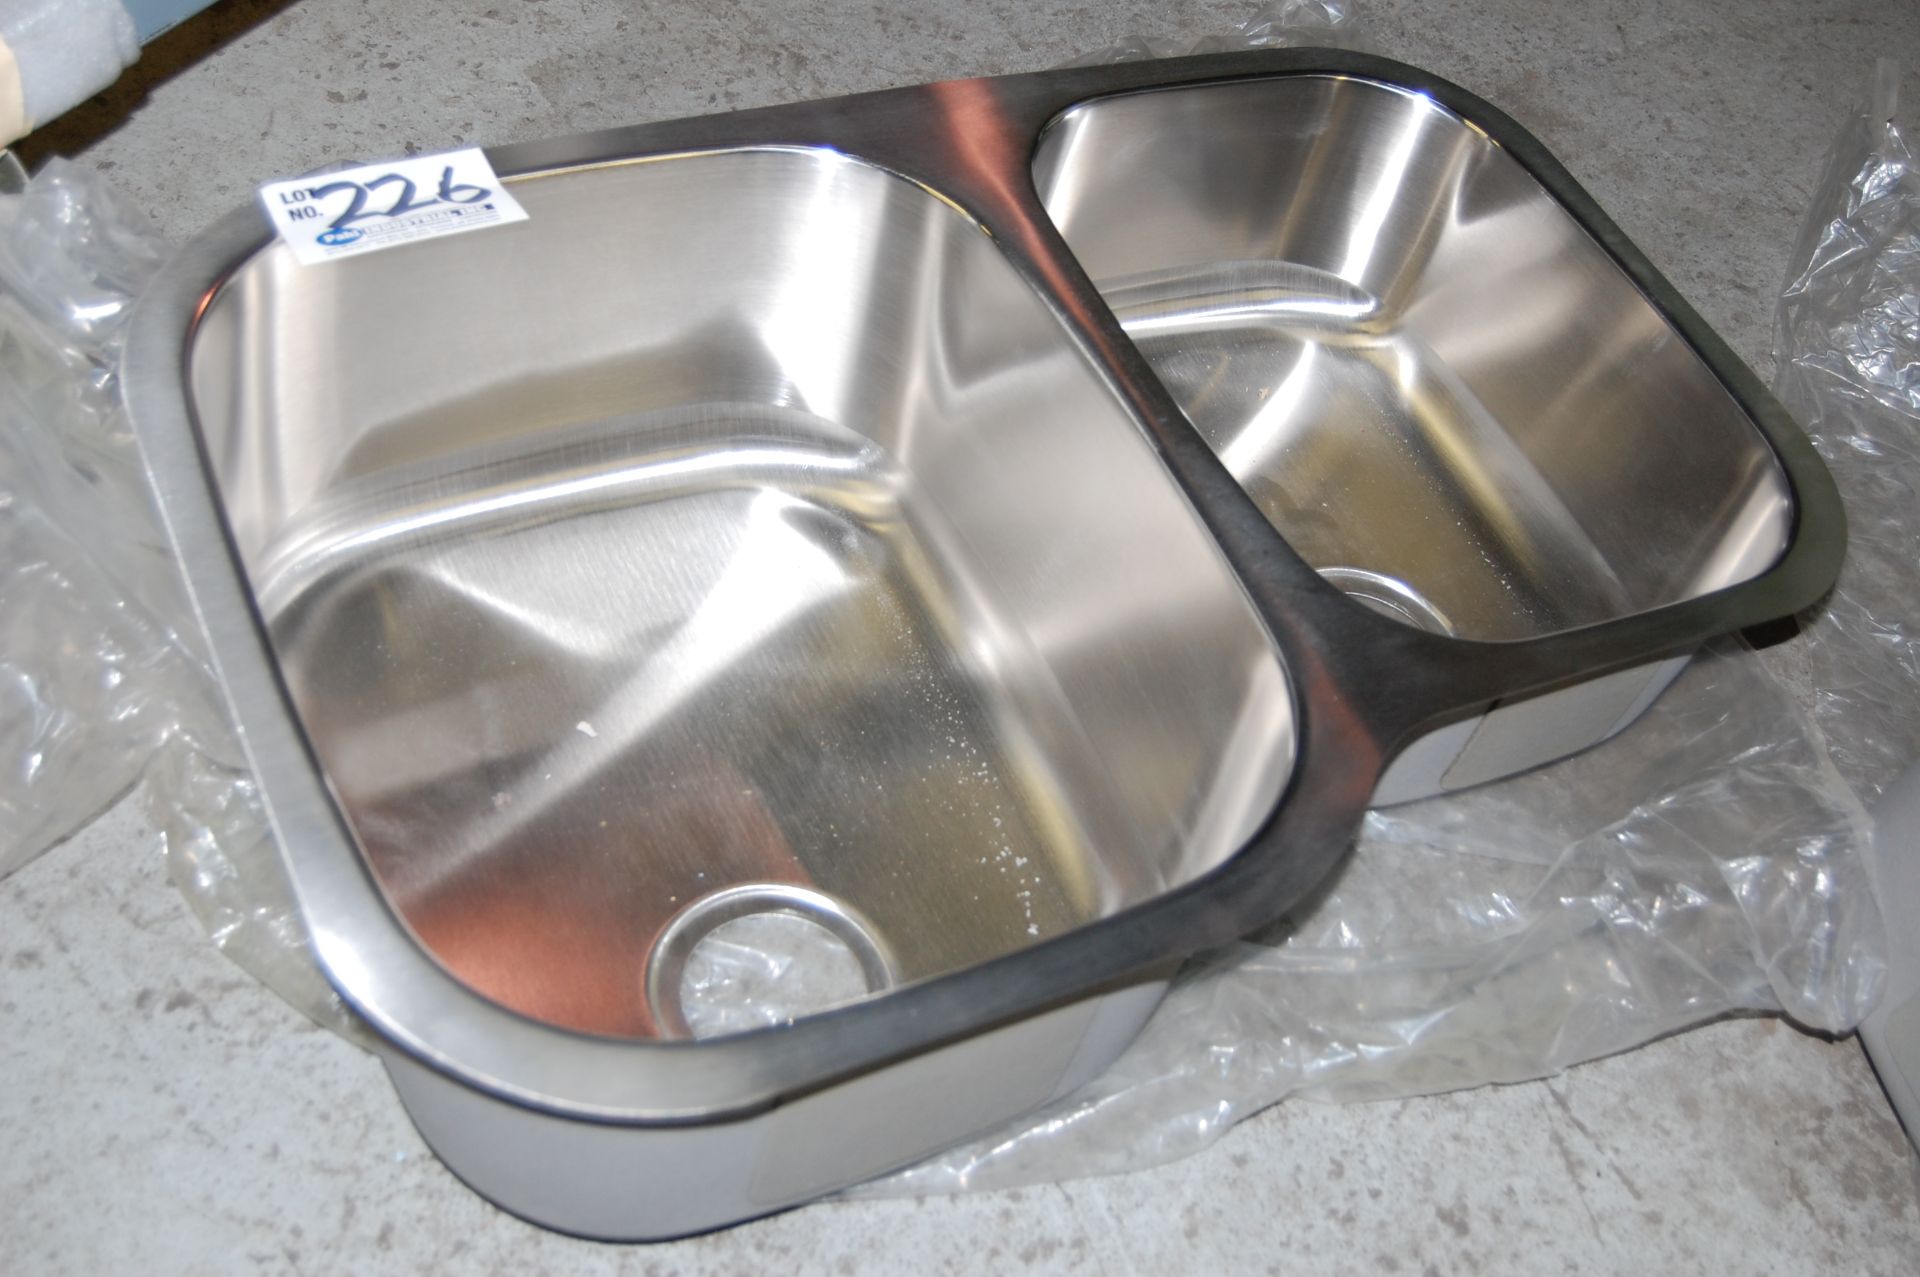 Stainless Steel Double Well Sink 31 1/2" x 20 1/2"